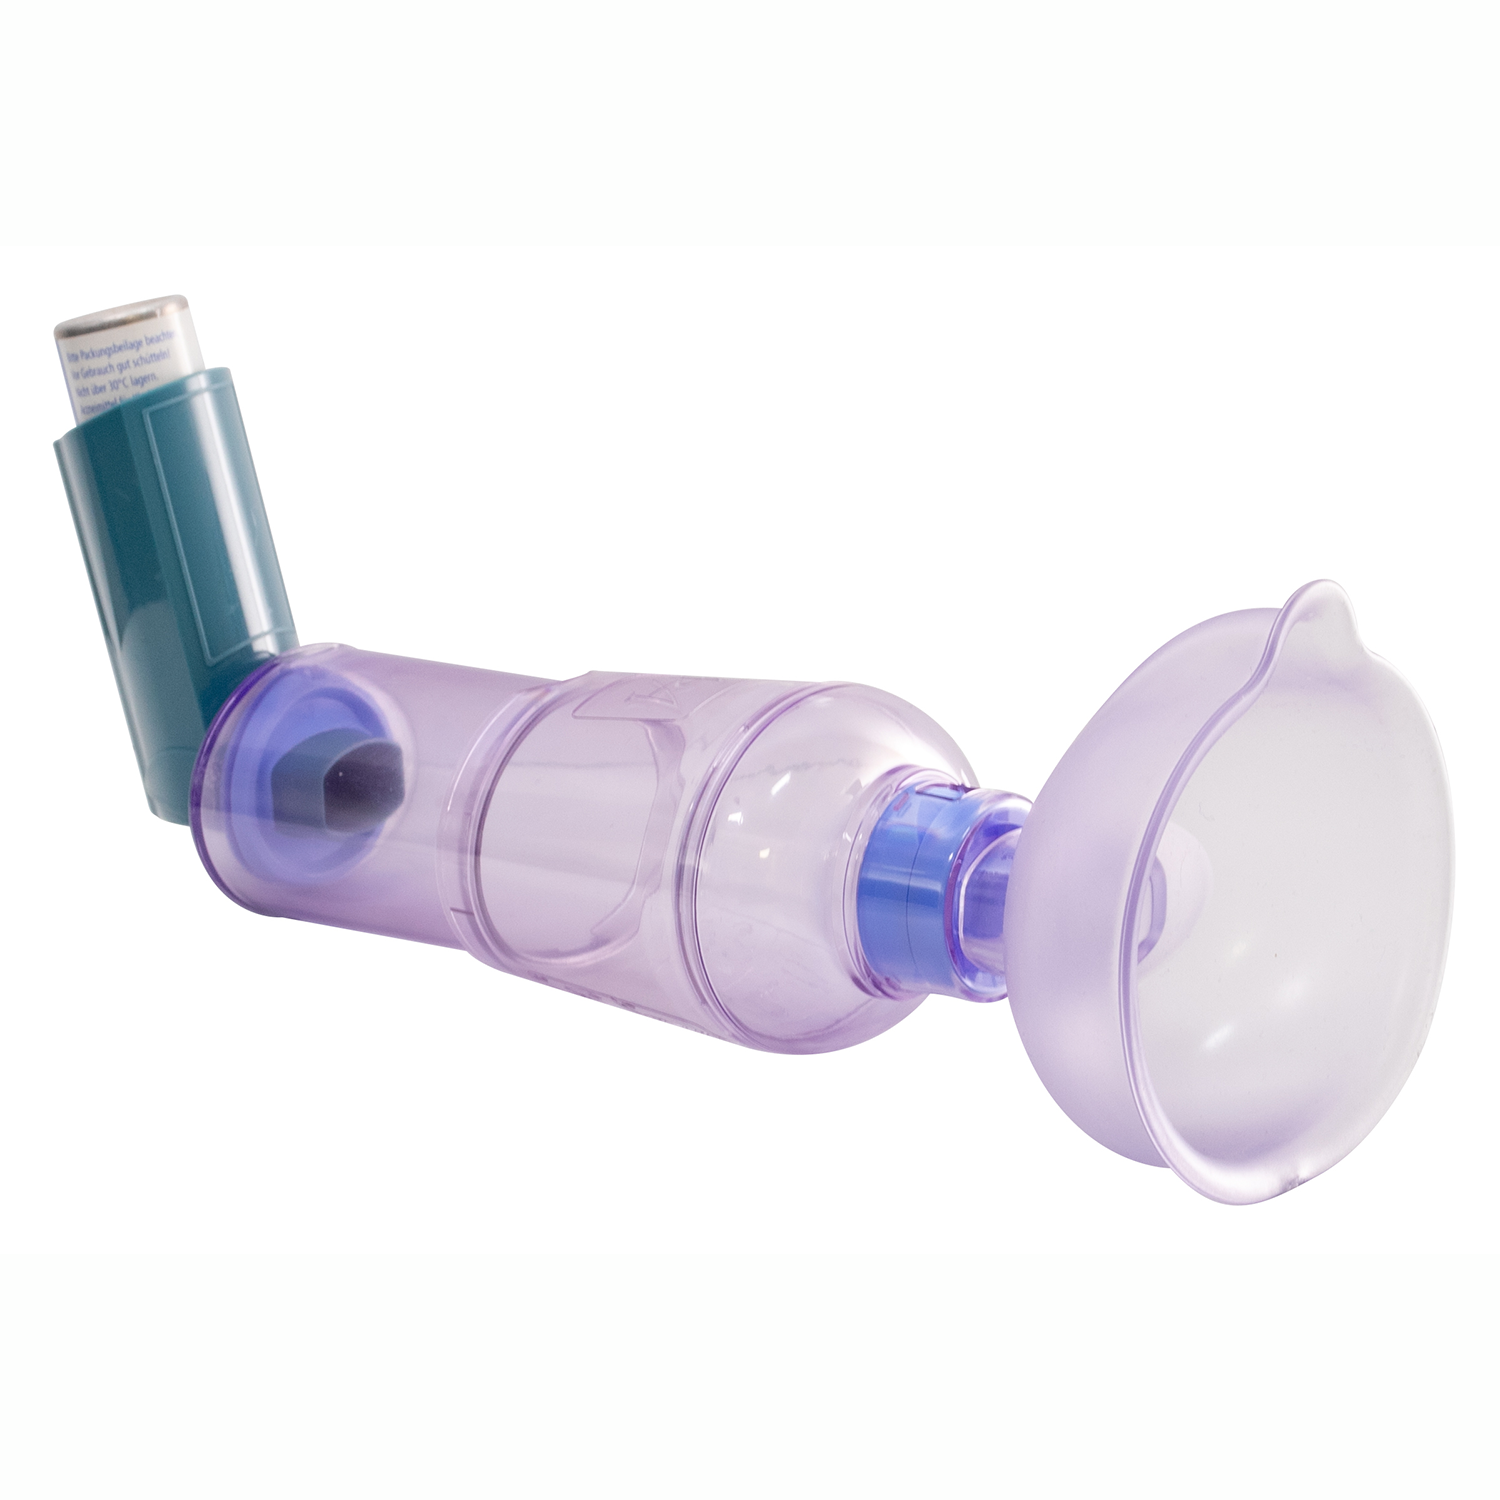 A2A Anti-Microbial Spacer | Boxed | With Small Mask (1)